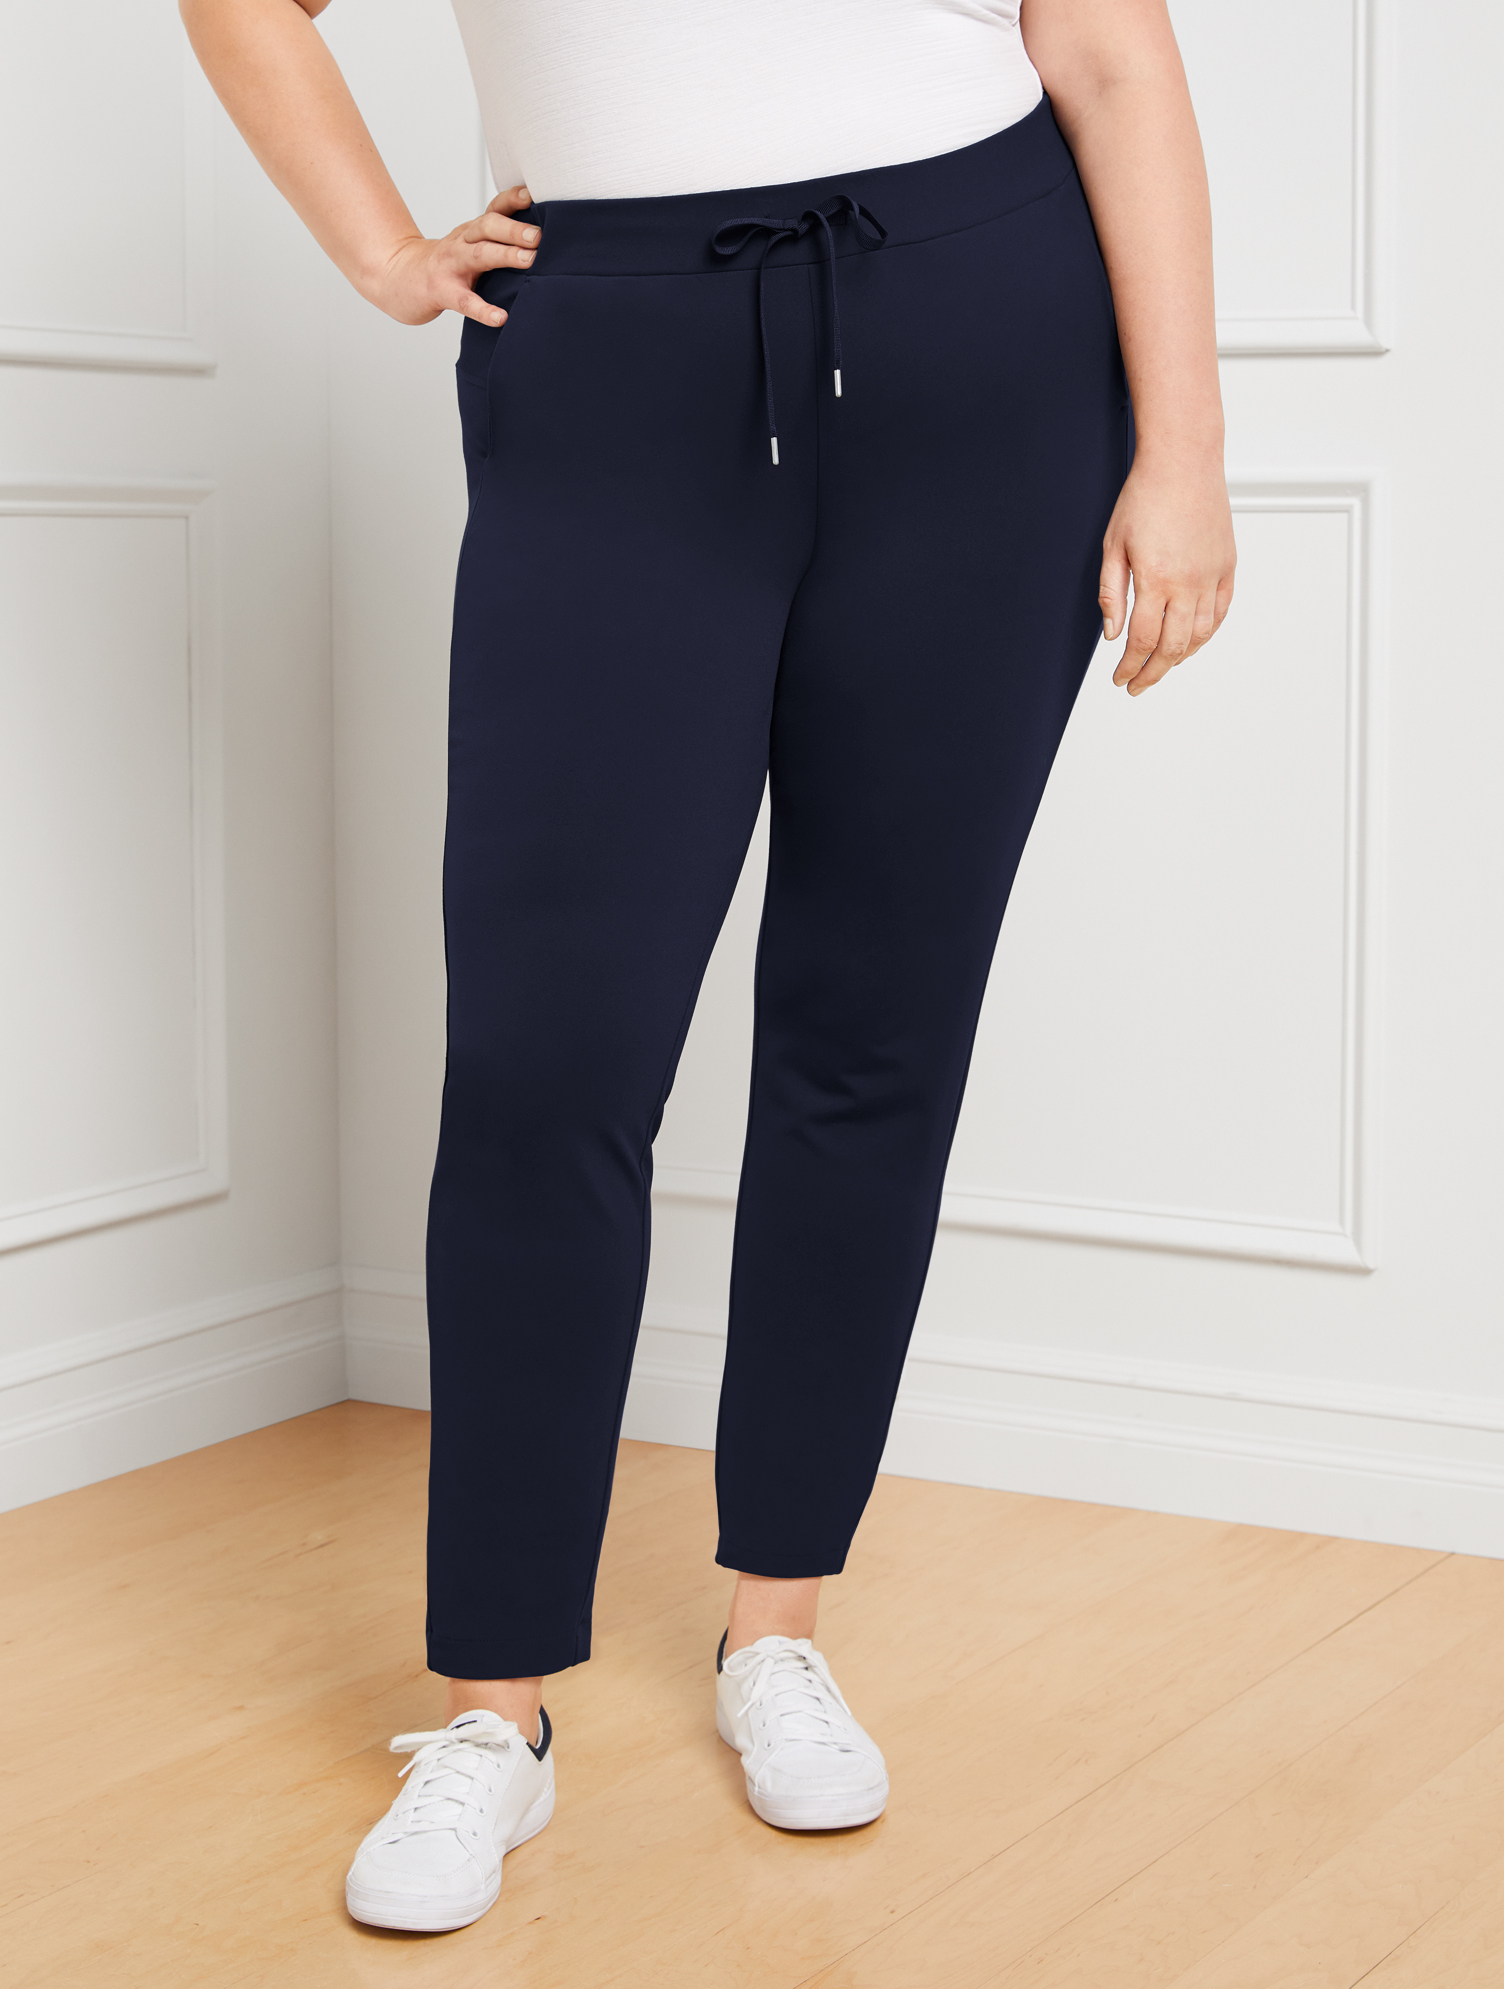 Talbots Out & About Stretch Jogger Pants - Blue - 3x